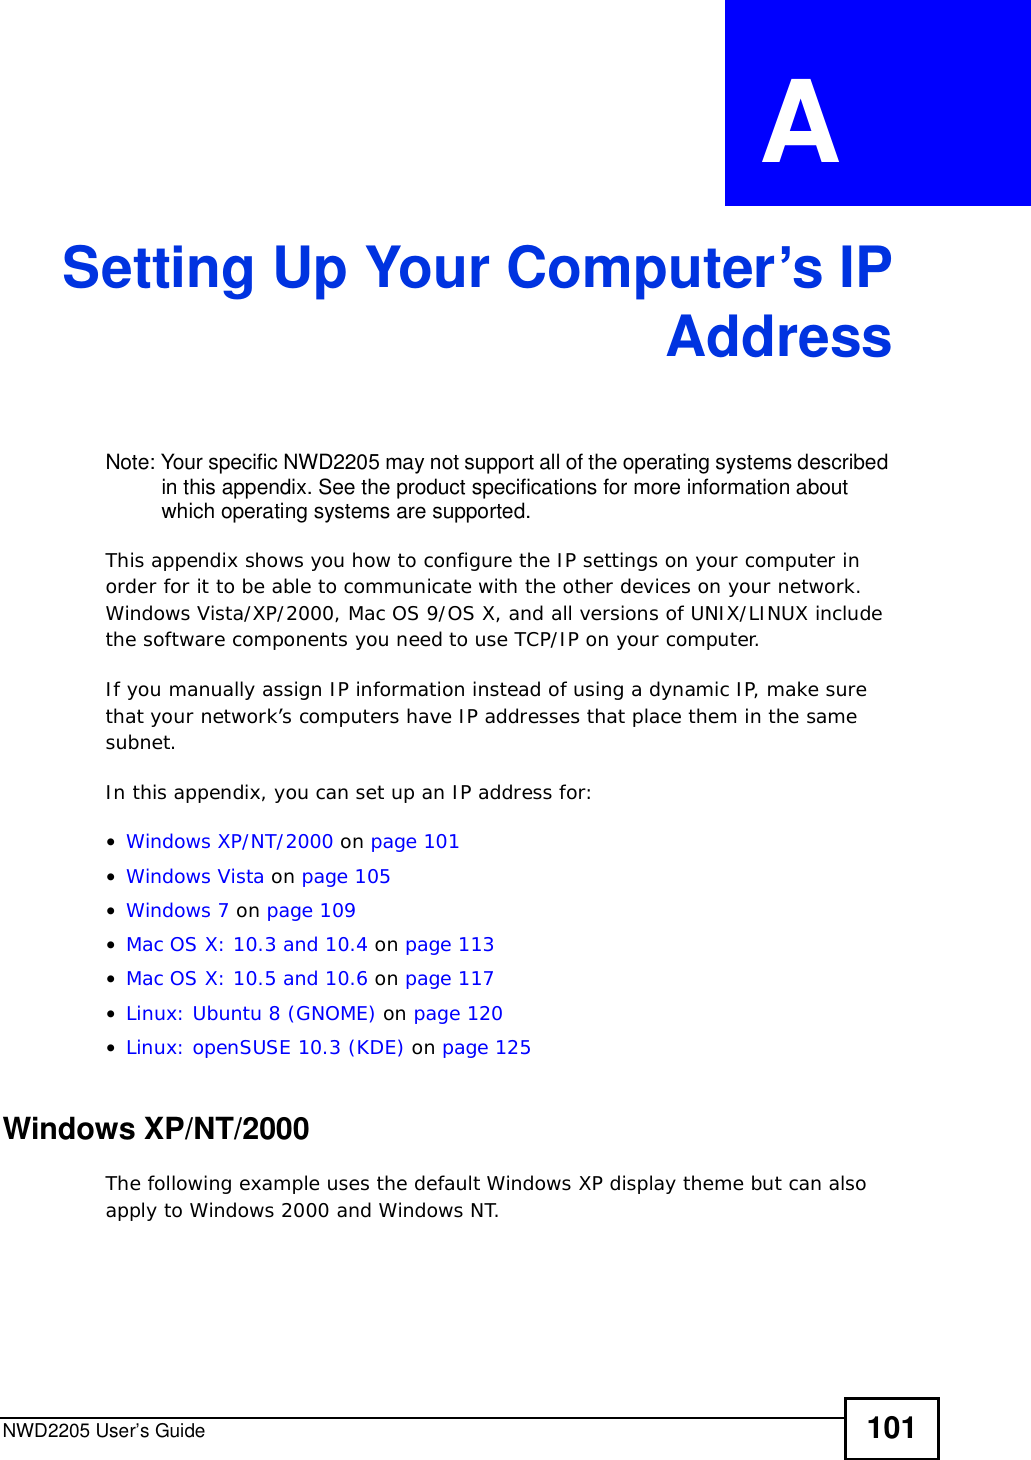 NWD2205 User’s Guide 101APPENDIX  A Setting Up Your Computer’s IPAddressNote: Your specific NWD2205 may not support all of the operating systems described in this appendix. See the product specifications for more information about which operating systems are supported.This appendix shows you how to configure the IP settings on your computer in order for it to be able to communicate with the other devices on your network. Windows Vista/XP/2000, Mac OS 9/OS X, and all versions of UNIX/LINUX include the software components you need to use TCP/IP on your computer. If you manually assign IP information instead of using a dynamic IP, make sure that your network’s computers have IP addresses that place them in the same subnet.In this appendix, you can set up an IP address for:•Windows XP/NT/2000 on page101•Windows Vista on page105•Windows 7 on page109•Mac OS X: 10.3 and 10.4 on page113•Mac OS X: 10.5 and 10.6 on page117•Linux: Ubuntu 8 (GNOME) on page 120•Linux: openSUSE 10.3 (KDE) on page125Windows XP/NT/2000The following example uses the default Windows XP display theme but can also apply to Windows 2000 and Windows NT.